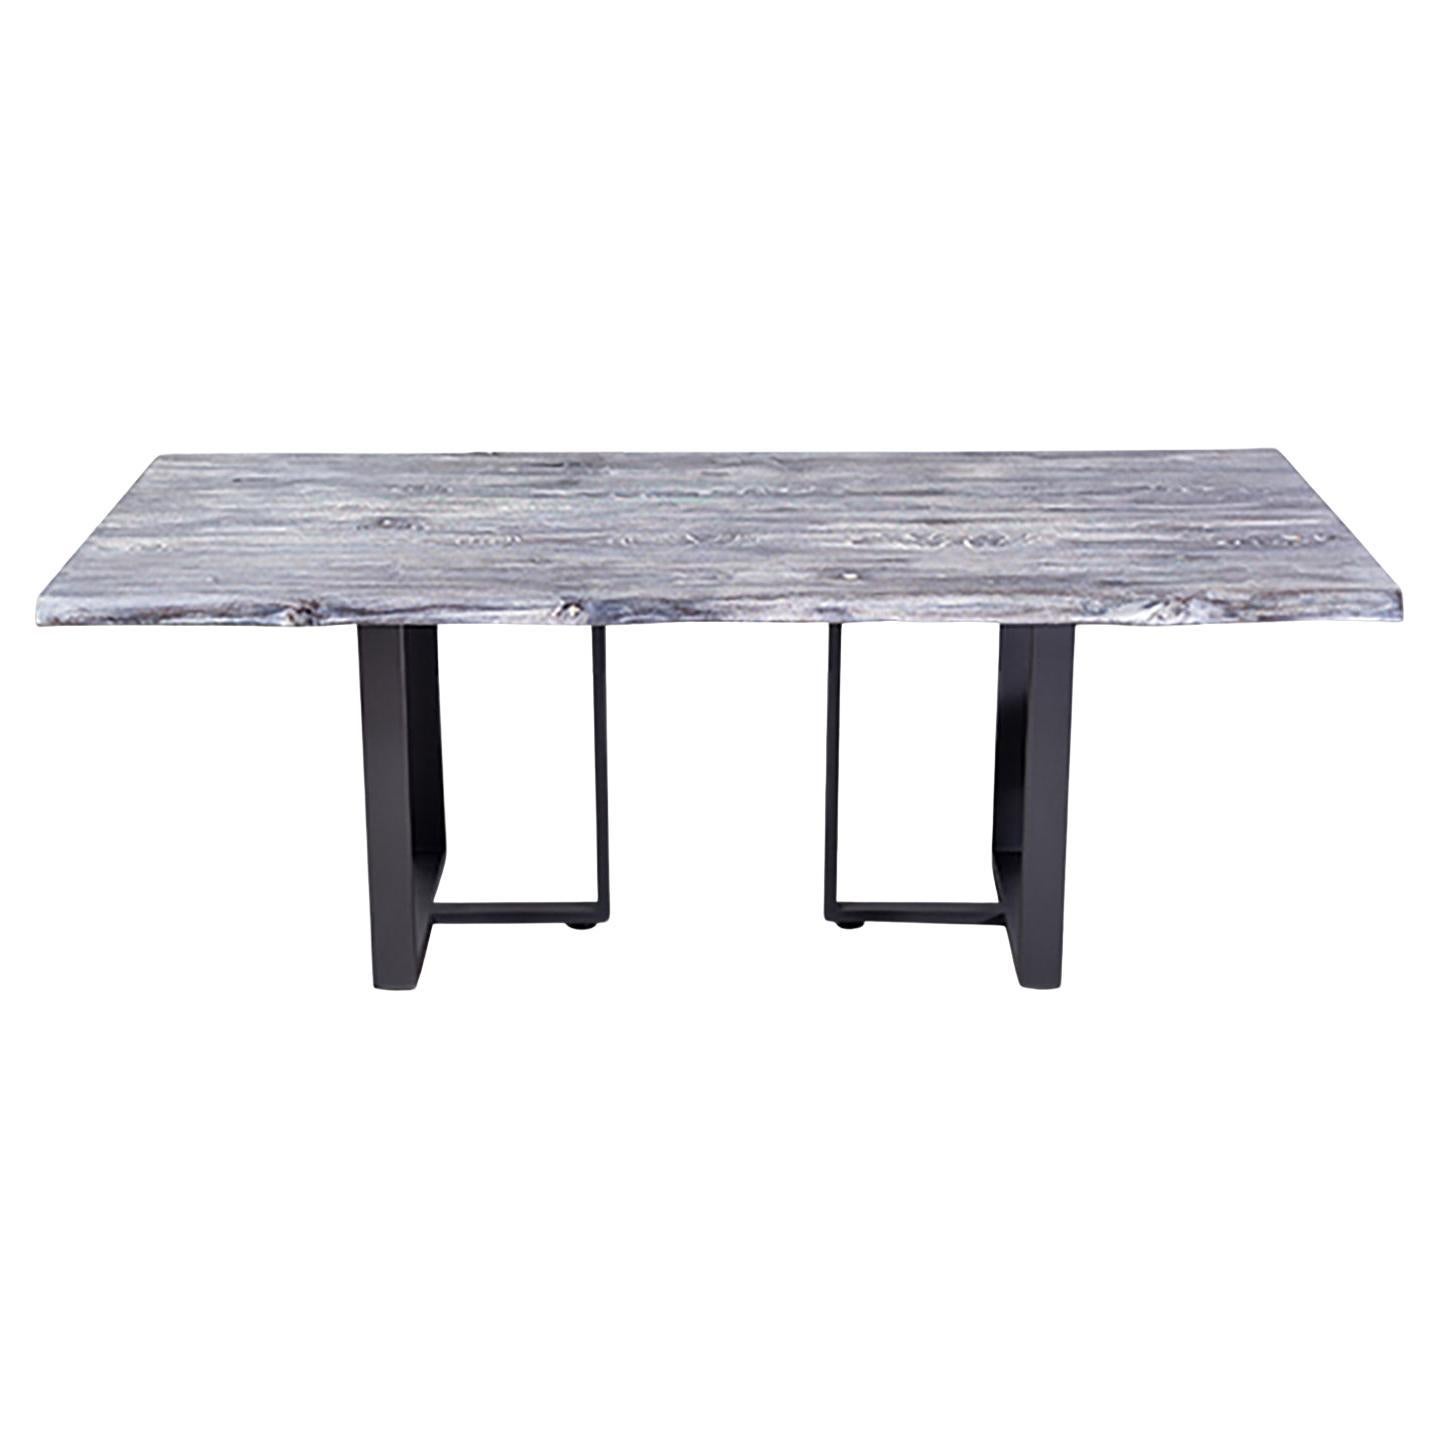 96" Solid Teak Live Edge Dining in a Organic Distressed Weathered Finish For Sale